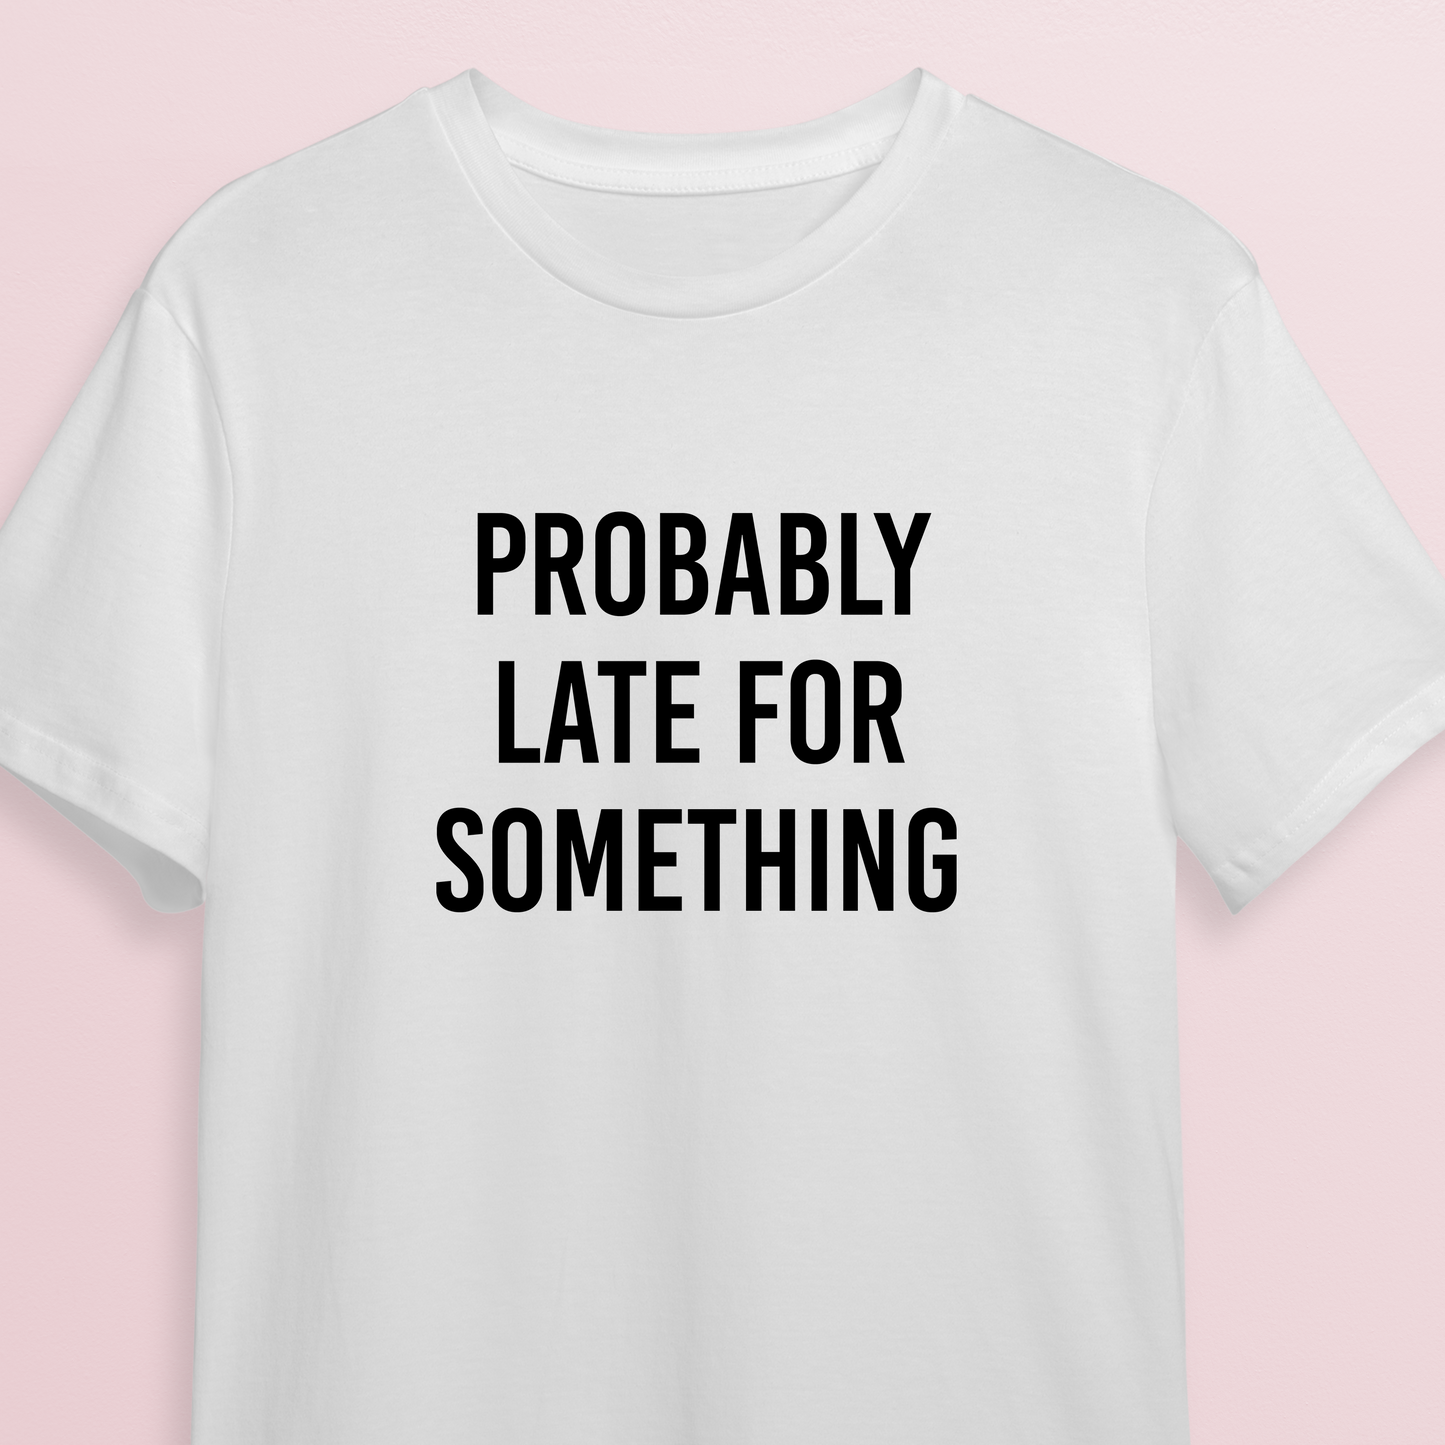 T-shirt - Probably late